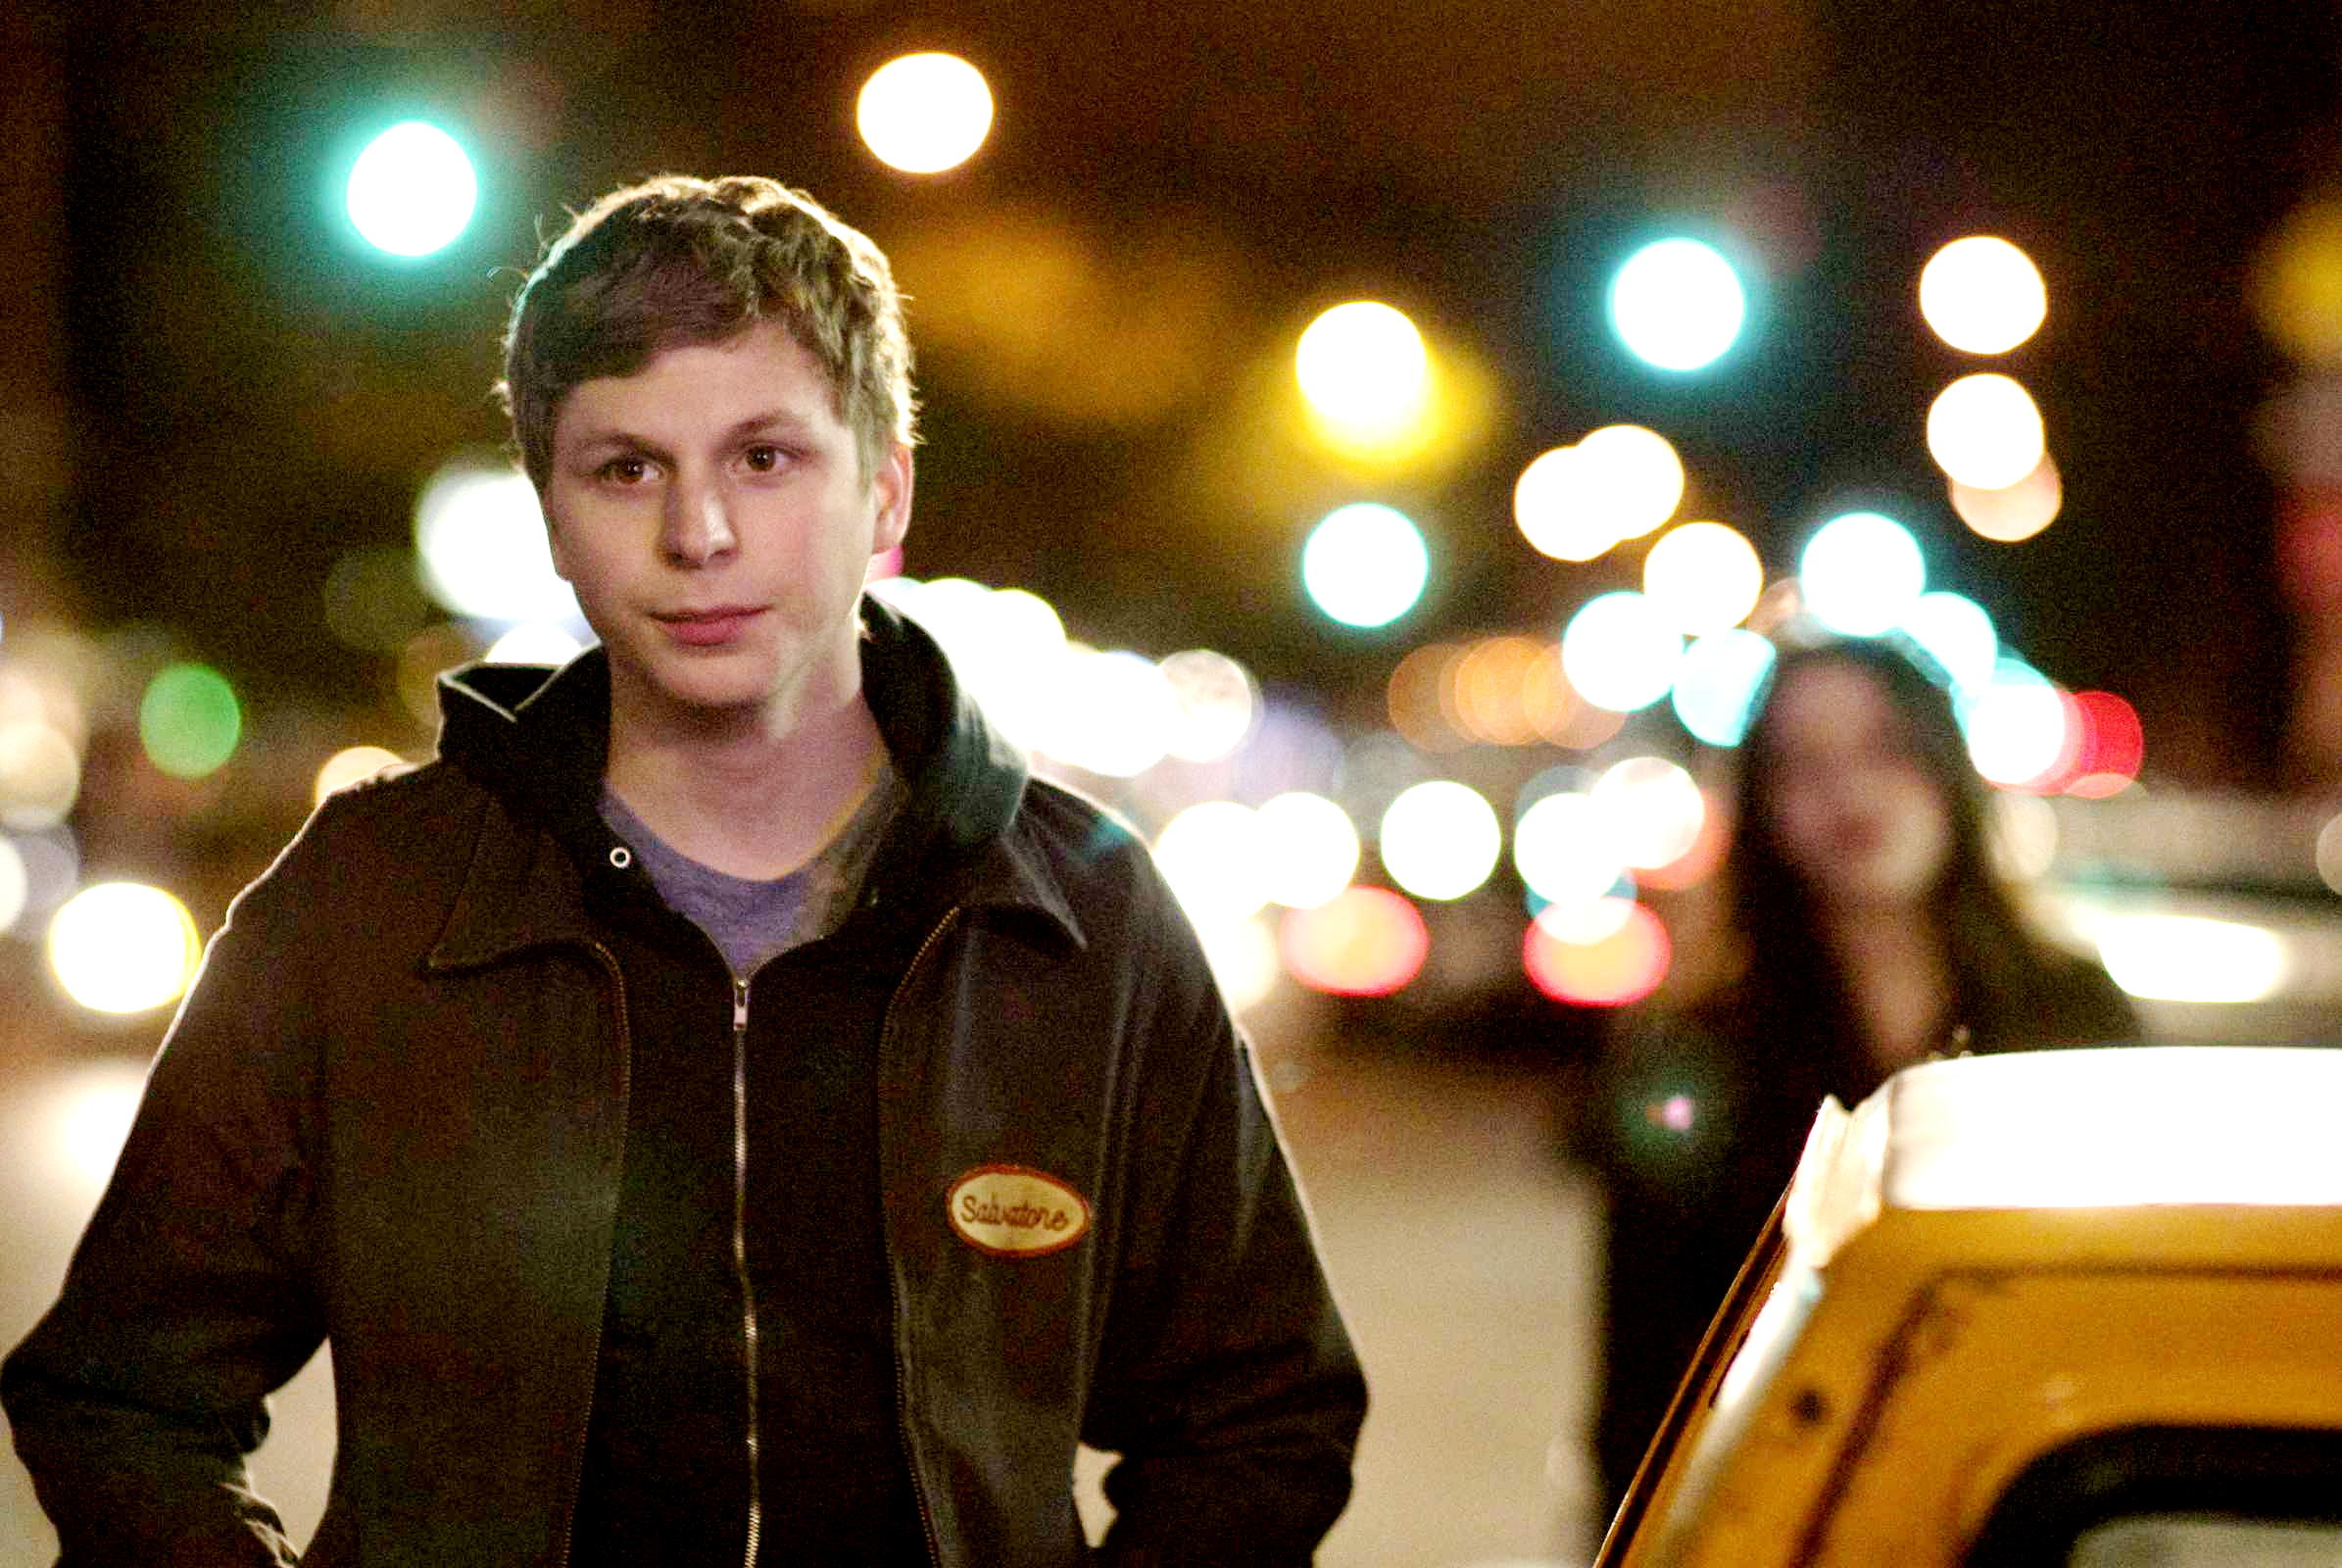 Michael Cera stars as Nick and Kat Dennings stars as Norah in Sony Pictures' Nick and Norah's Infinite Playlist (2008). Photo credit by JoJo Whilden.